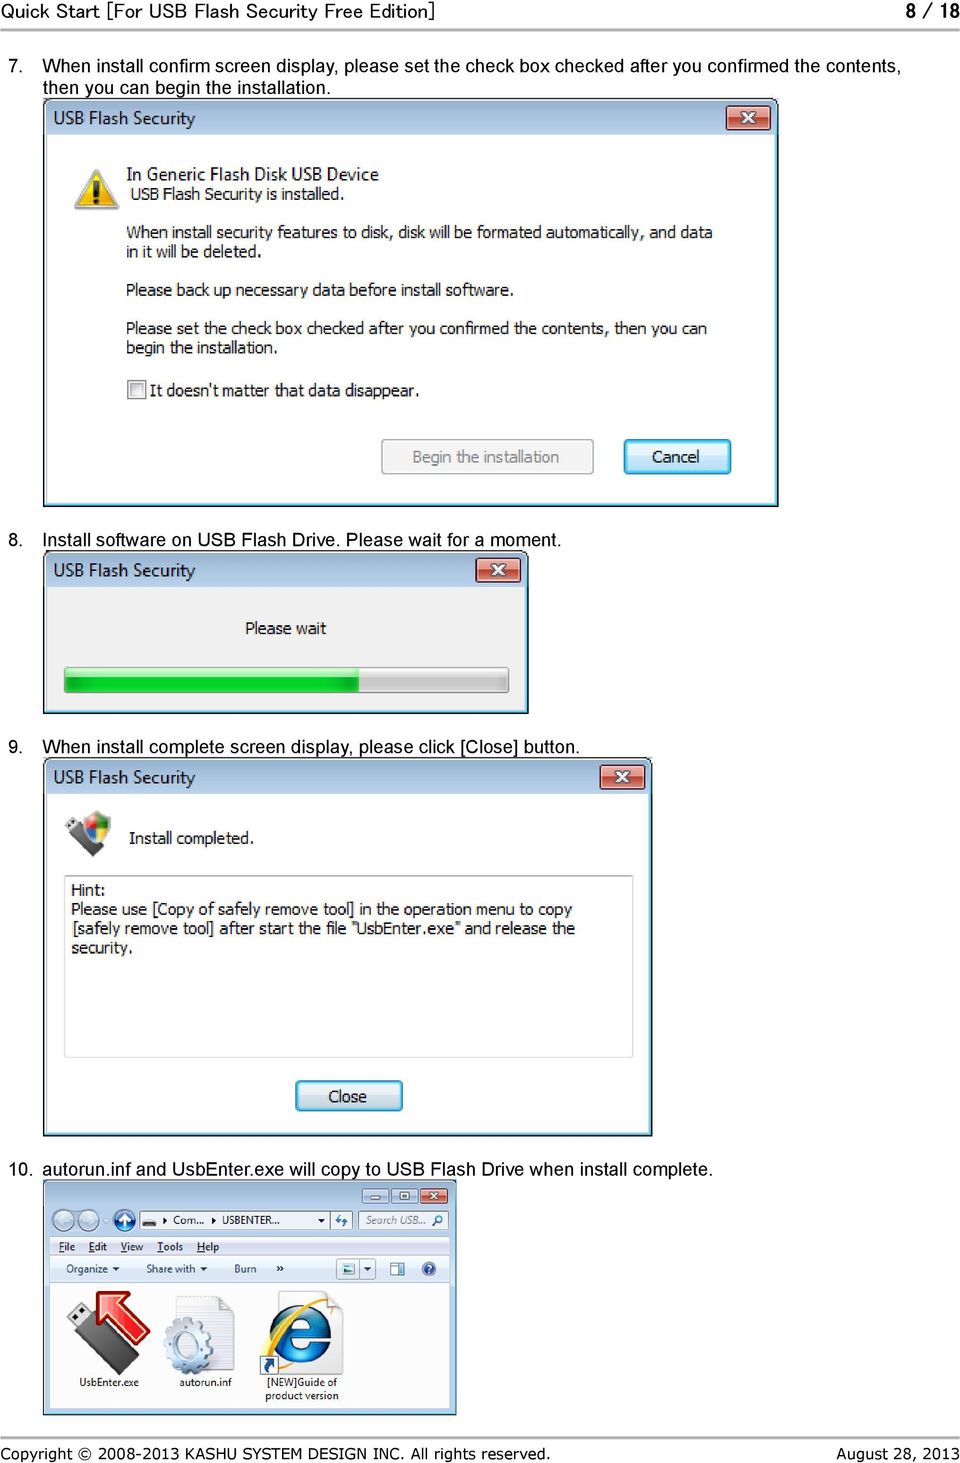 then you can begin the installation. 8. Install software on USB Flash Drive. Please wait for a moment. 9.